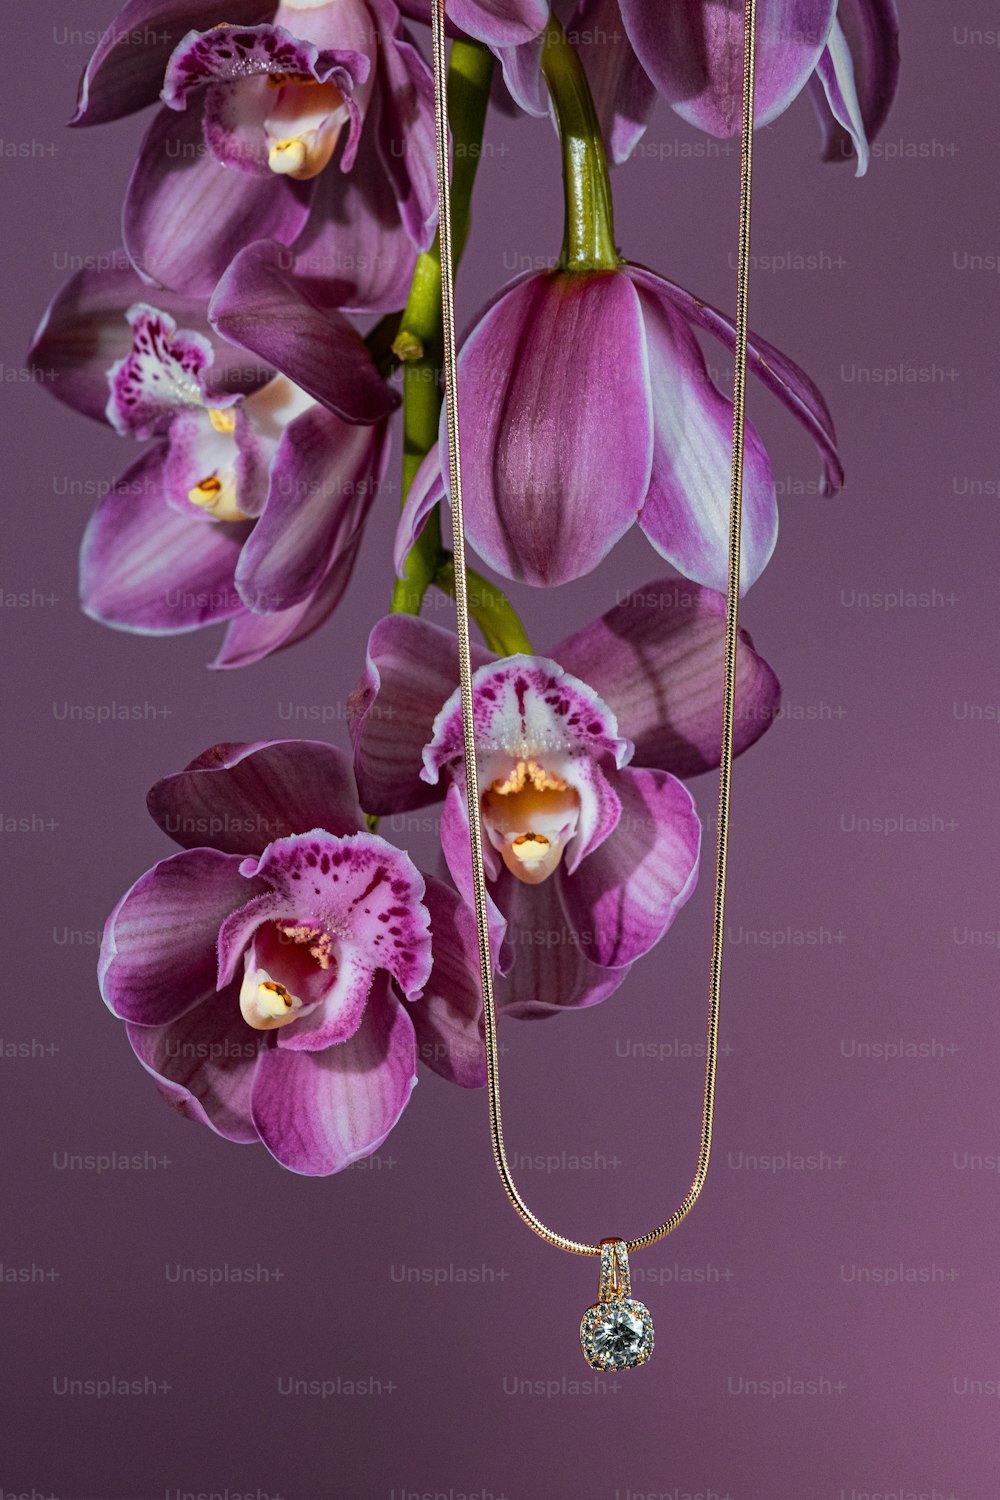 Purple Orchid Pictures  Download Free Images on Unsplash